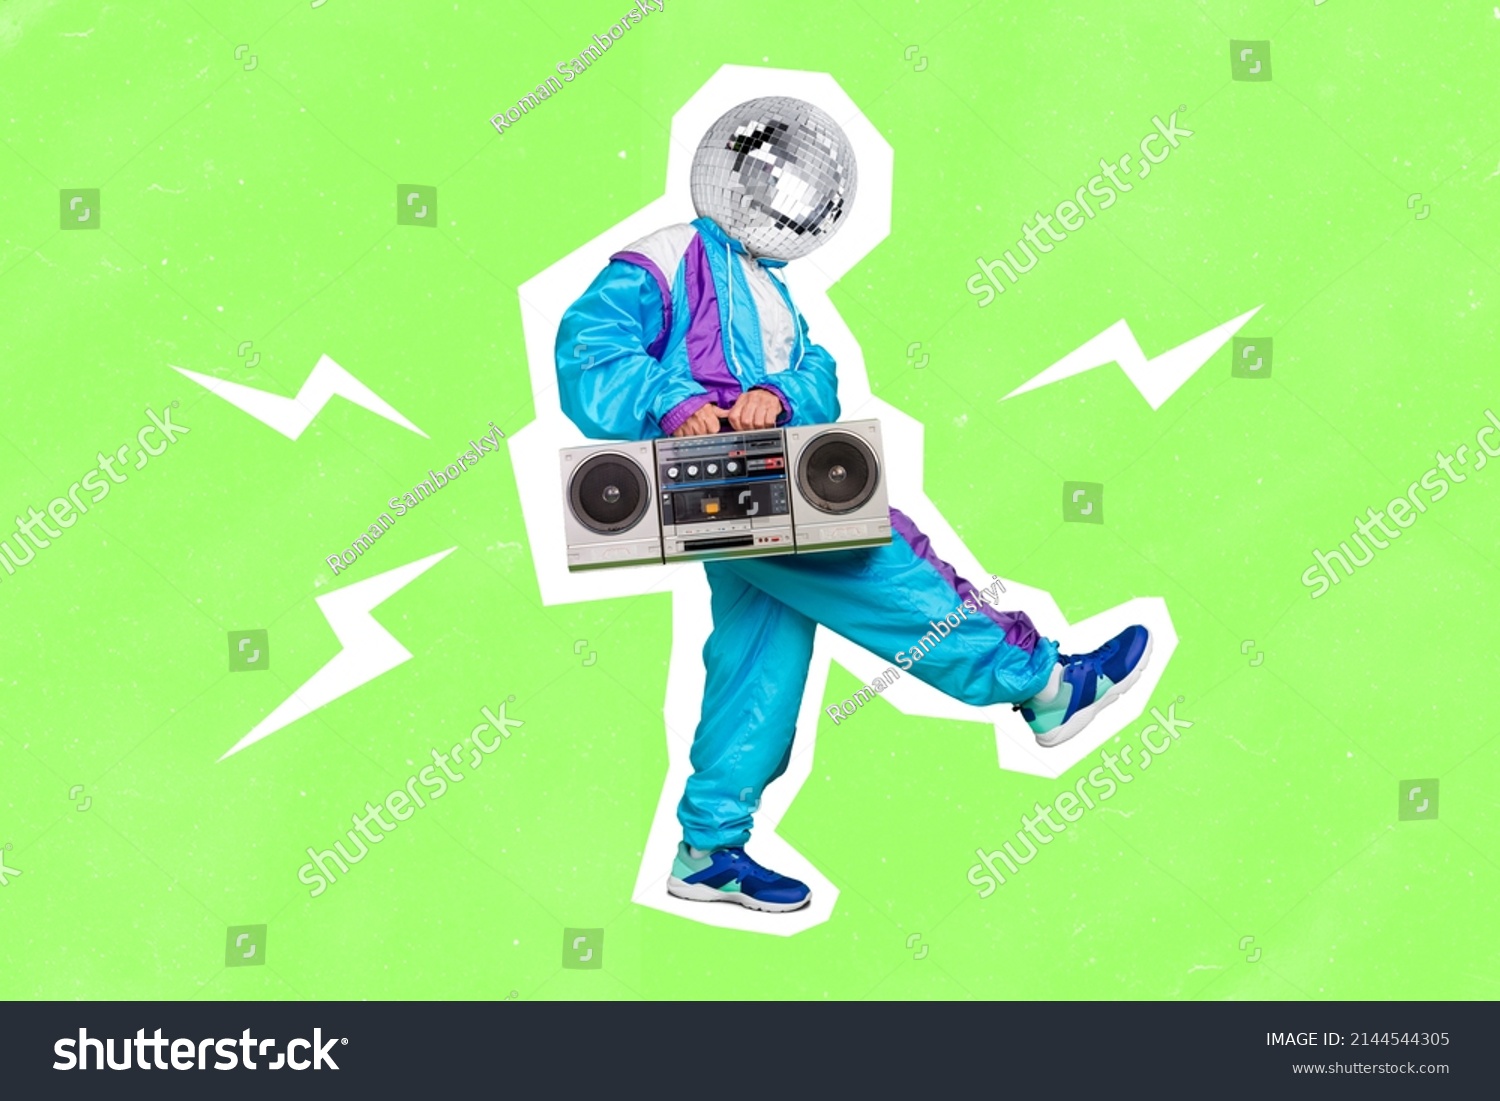 Illustration of male dude walking dancer hold boom box player retro chill have disco ball on head silhouette painted white color green background #2144544305